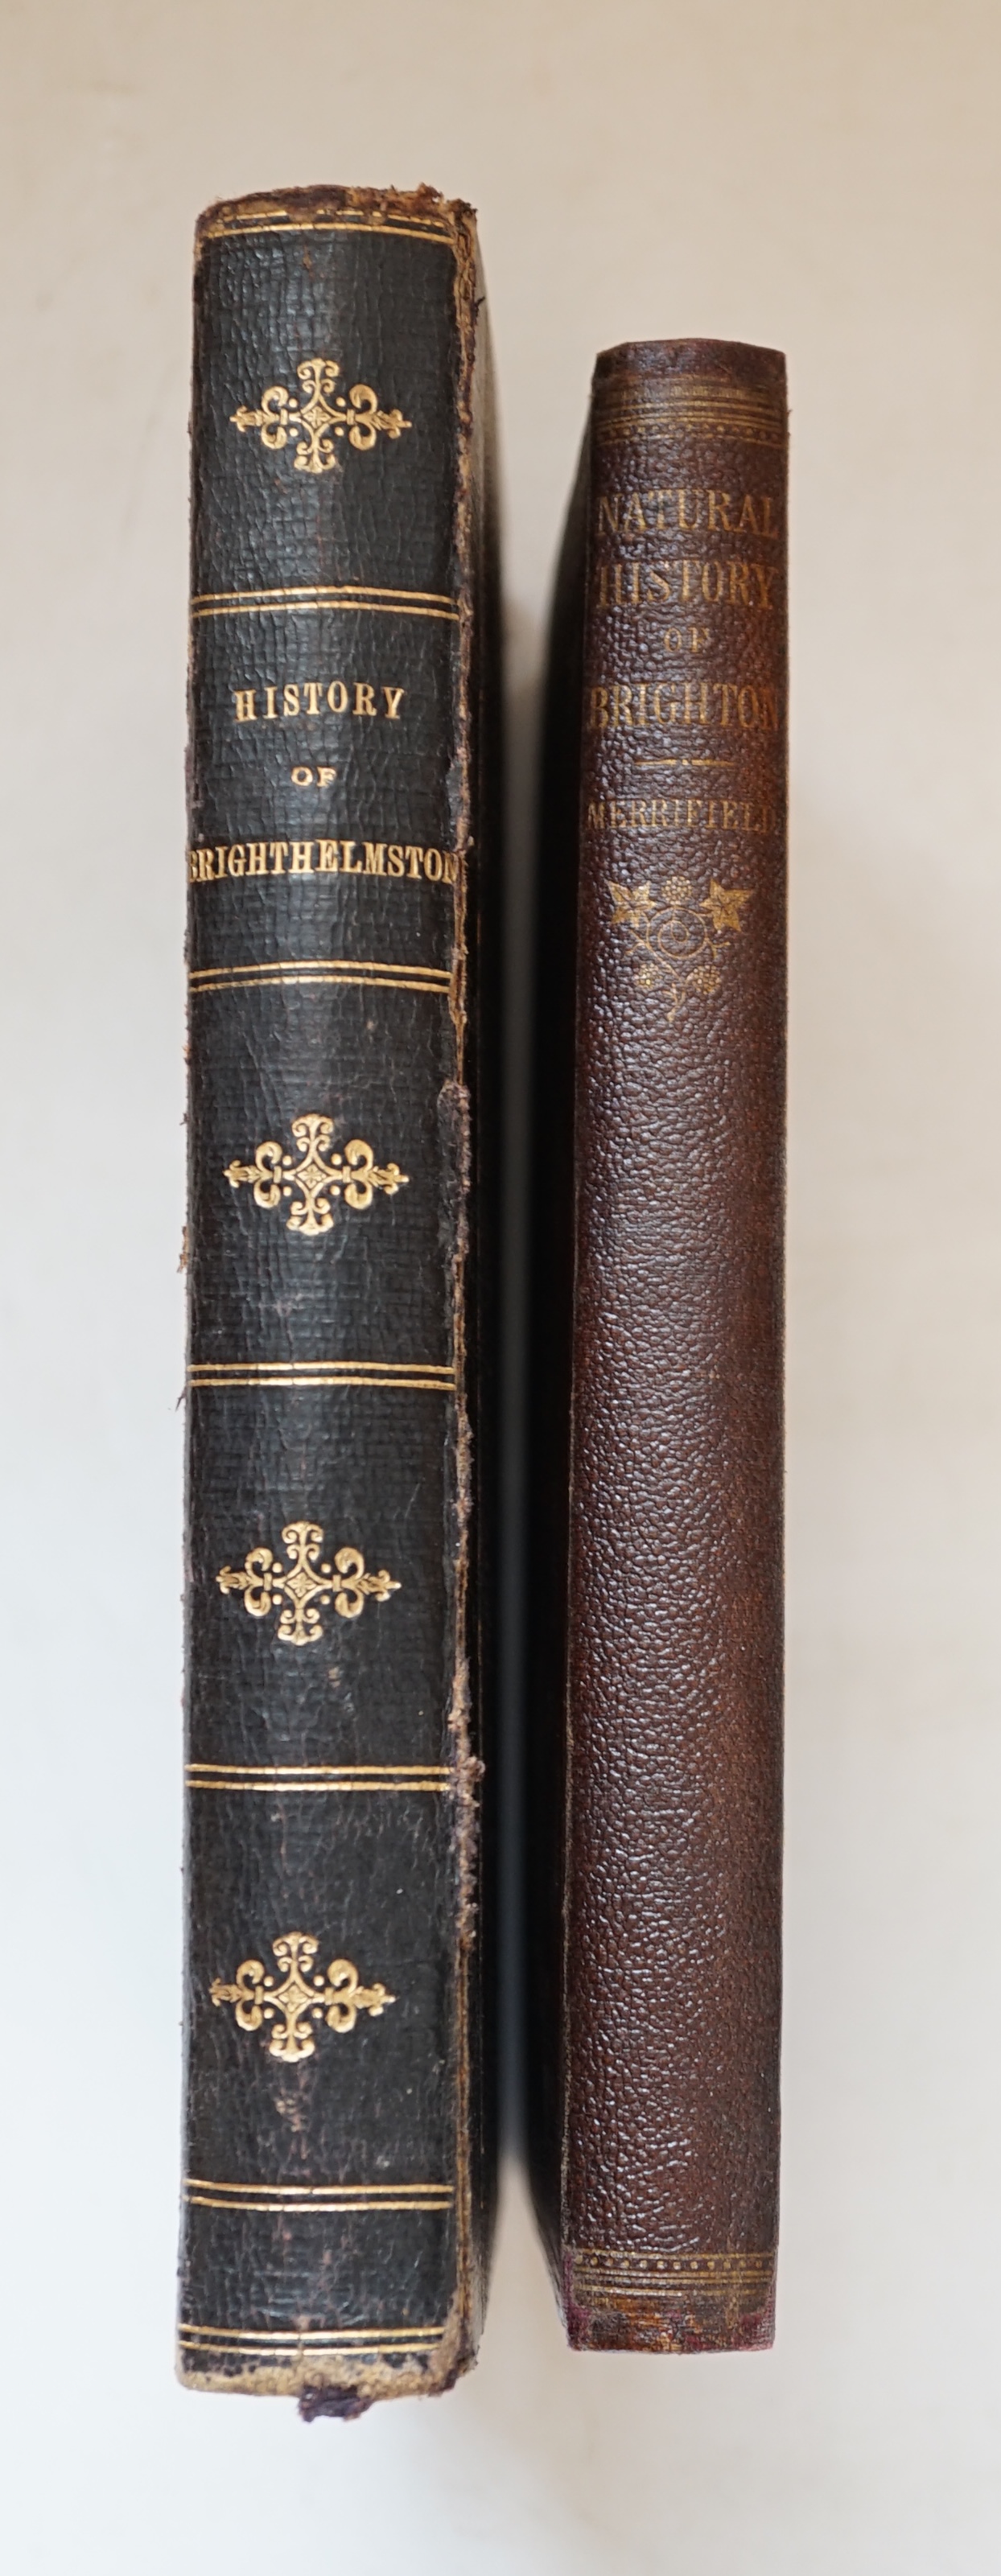 Erredge, John Ackerson - History of Brighthelmston or, Brighton as I View it and others Knew it, with a Chronological Table of Local Events, 8vo, half black morocco, split to from spine edge, Brighton, 1862; and Merrifie